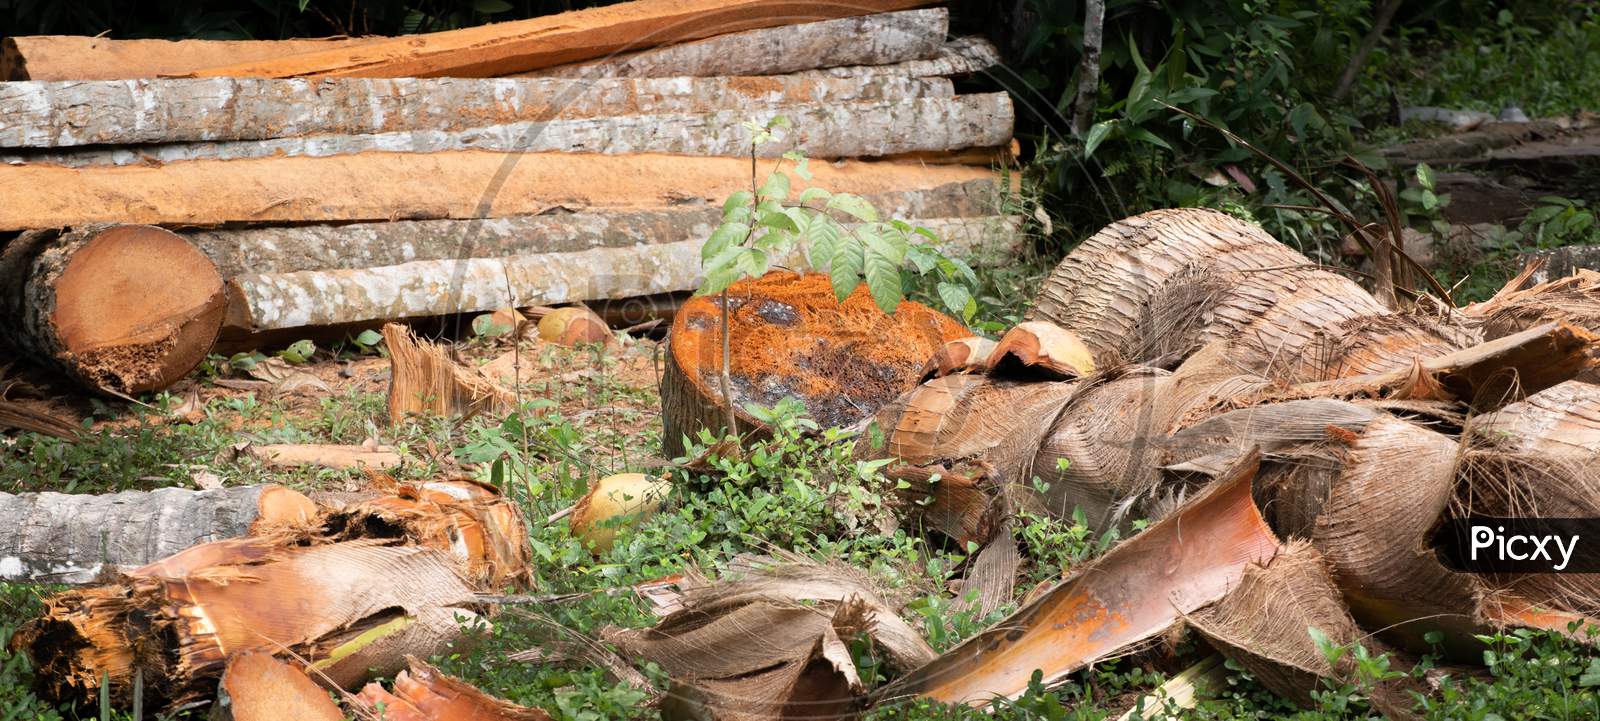 Valuable Coconut Trees Cut Down For Logs And Timber, Humans Causing Damage To Mother Nature Concept.